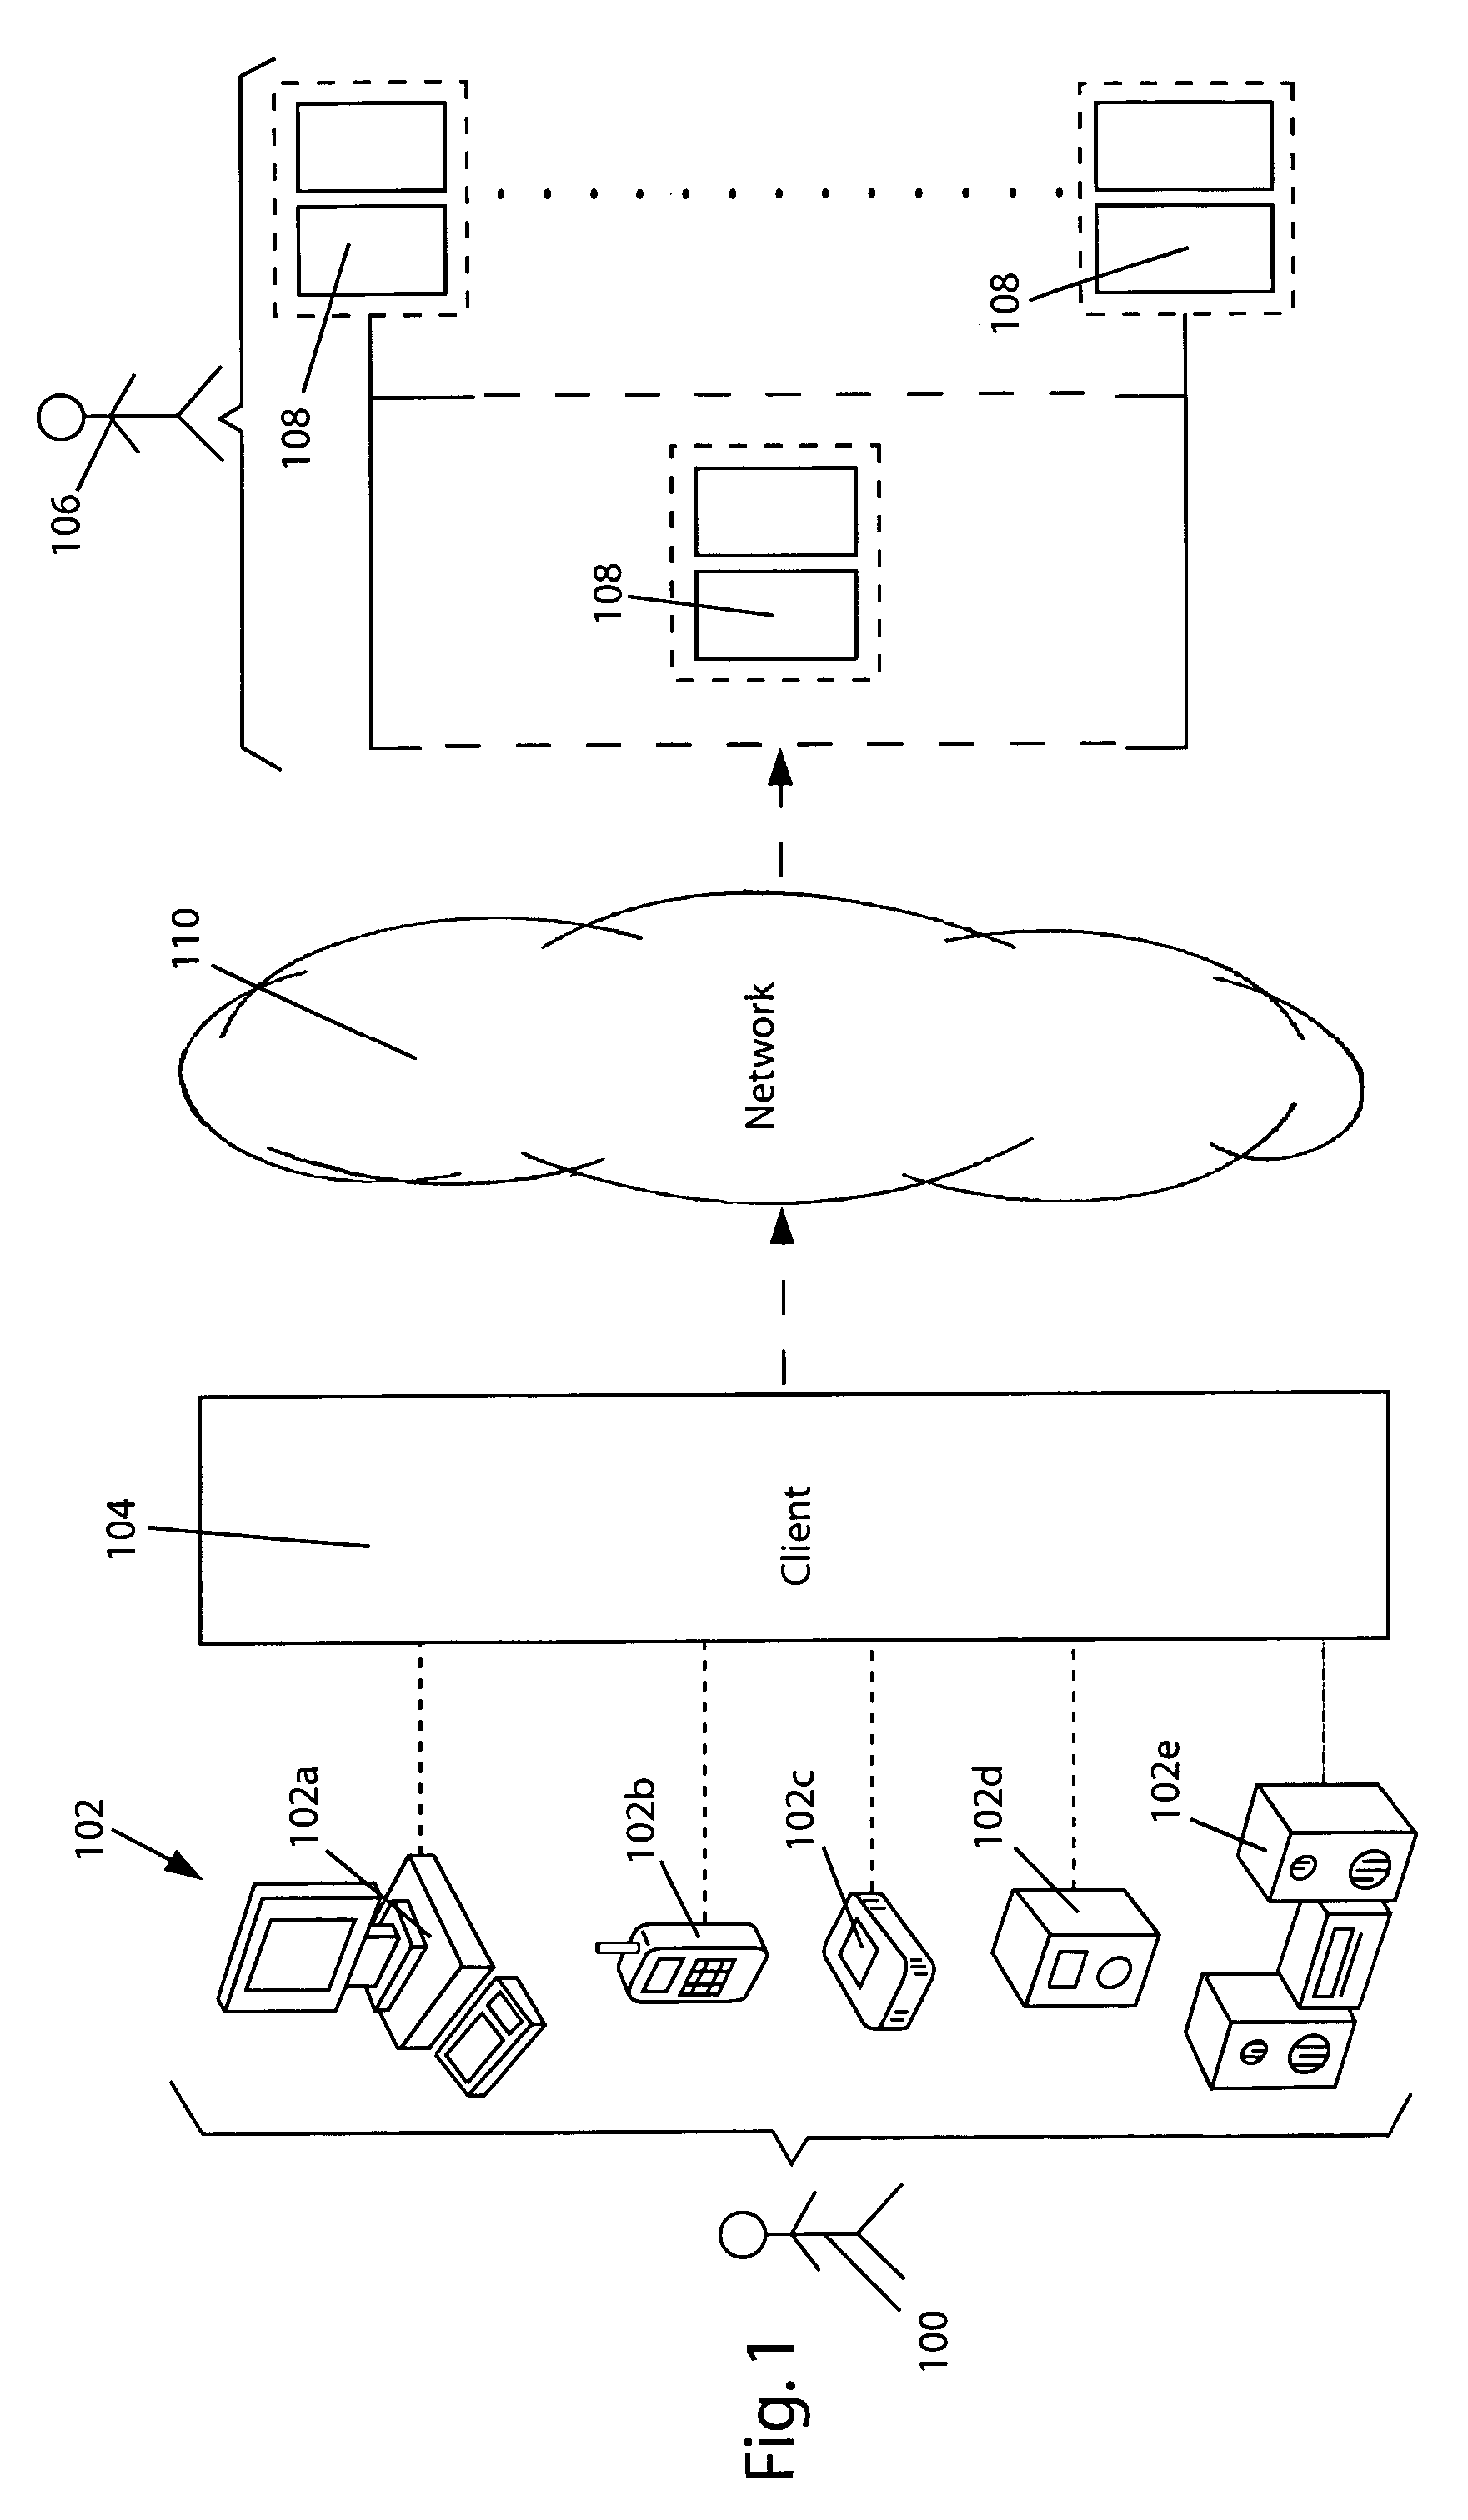 System and method for automatically uploading analysis data for customer support